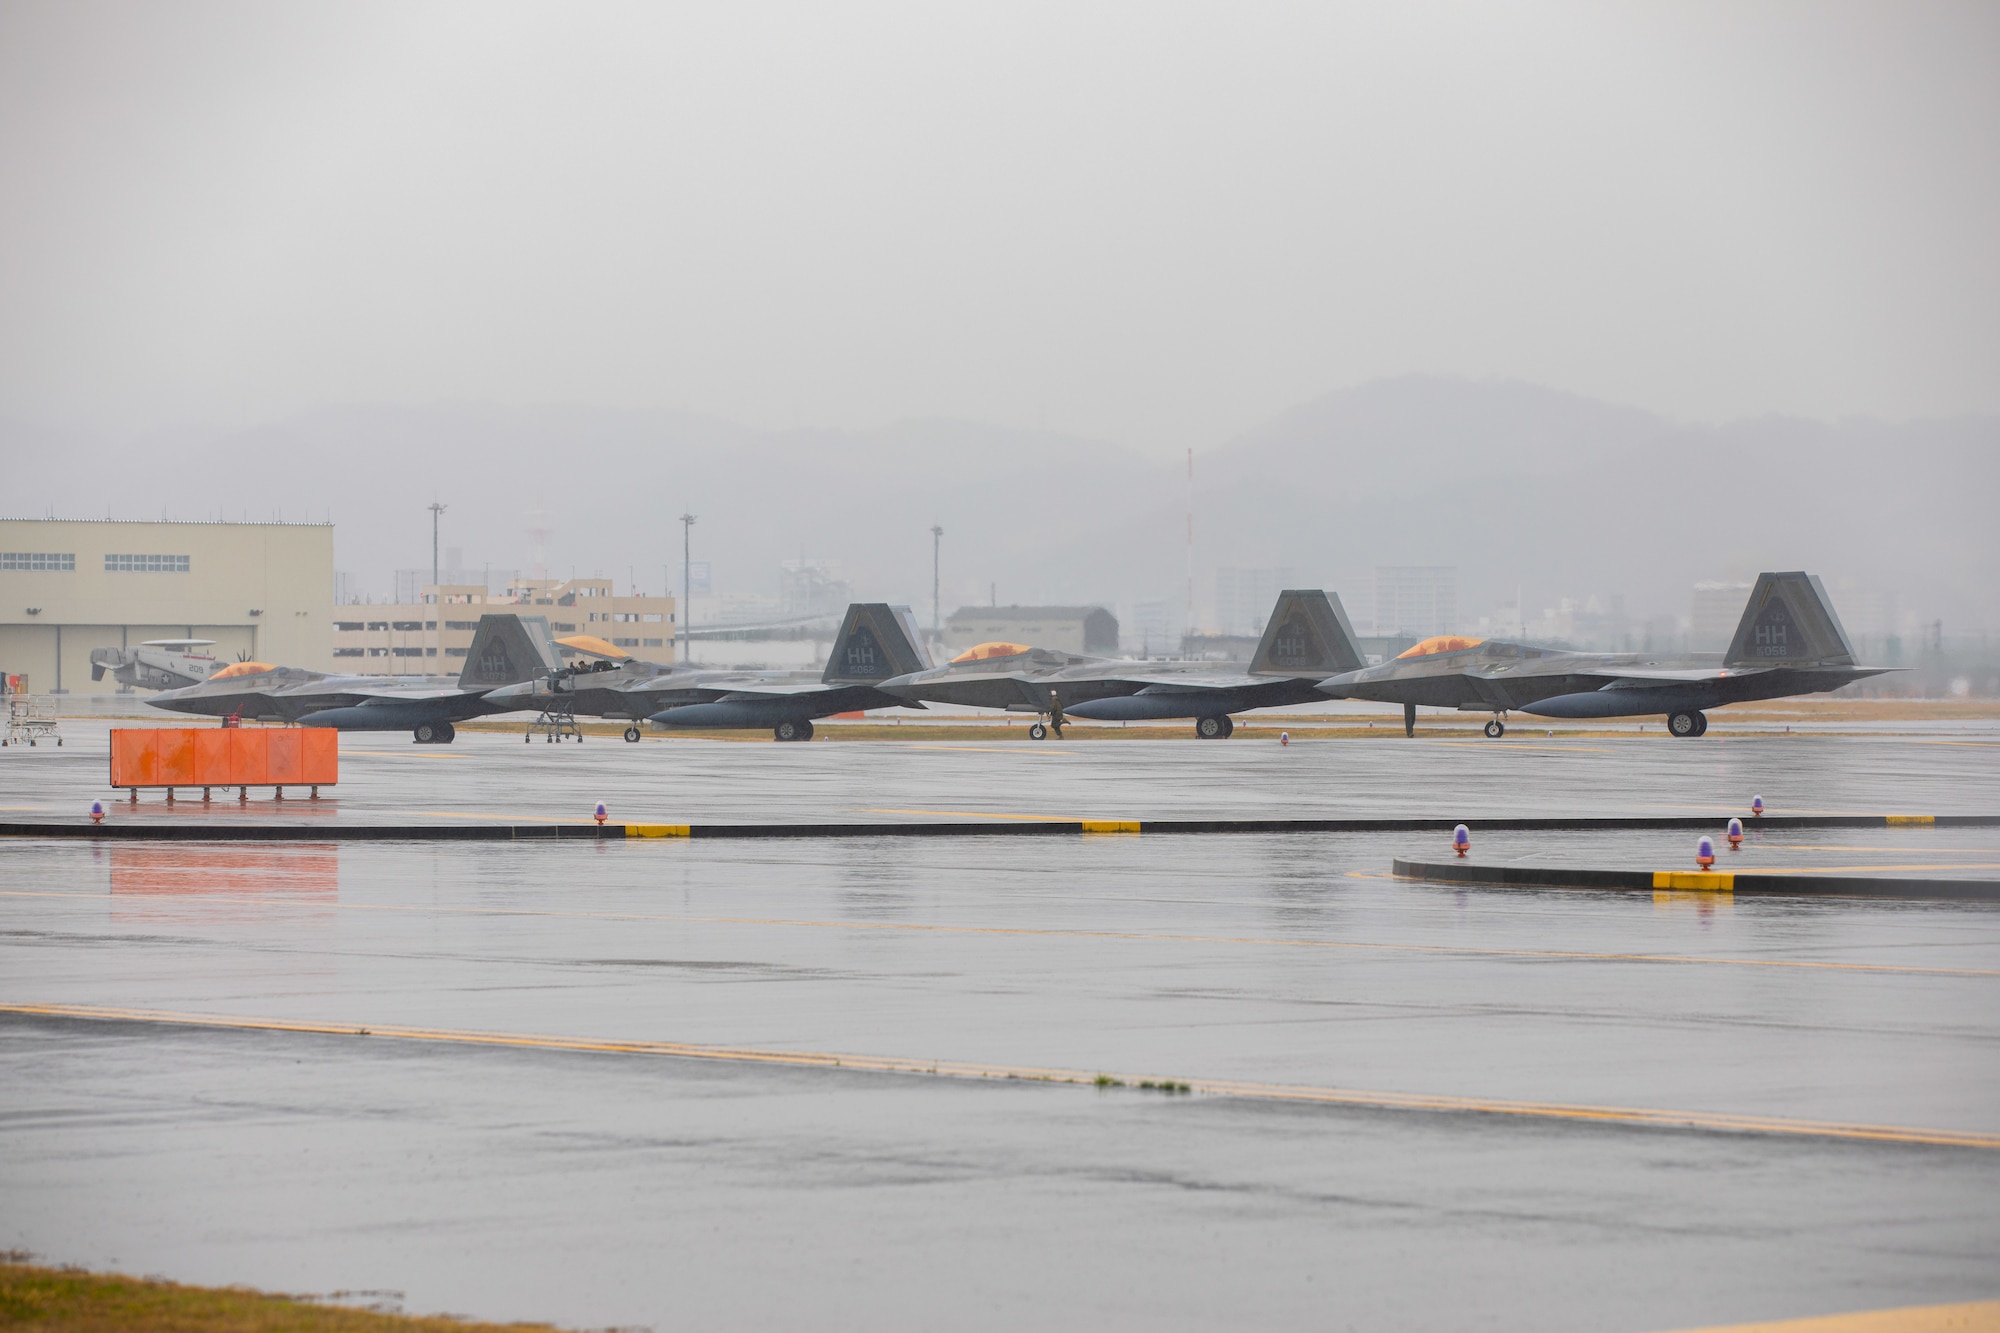 A U.S. Air Force F-22 Raptors with the 199th Fighter Squadron sit on the flight line at Marine Corps Air Station Iwakuni, Japan, March 12, 2021. Airmen with the 199th Fighter Squadron and the 19th Fighter Squadron, based out of Joint Base Pearl Harbor-Hickam, Hawaii, deployed to MCAS Iwakuni to conduct local area training with U.S. Marine Corps units. Pacific Air Forces’ fighters stand ready to support the global strategic environment as it continues to demand flexibility and freedom of action. The Dynamic Force Employment concept will change the way the Department of Defense uses the joint force with its focus on strategic predictability and operational unpredictability. (U.S. Marine Corps photo by Lance Cpl. Triton Lai)